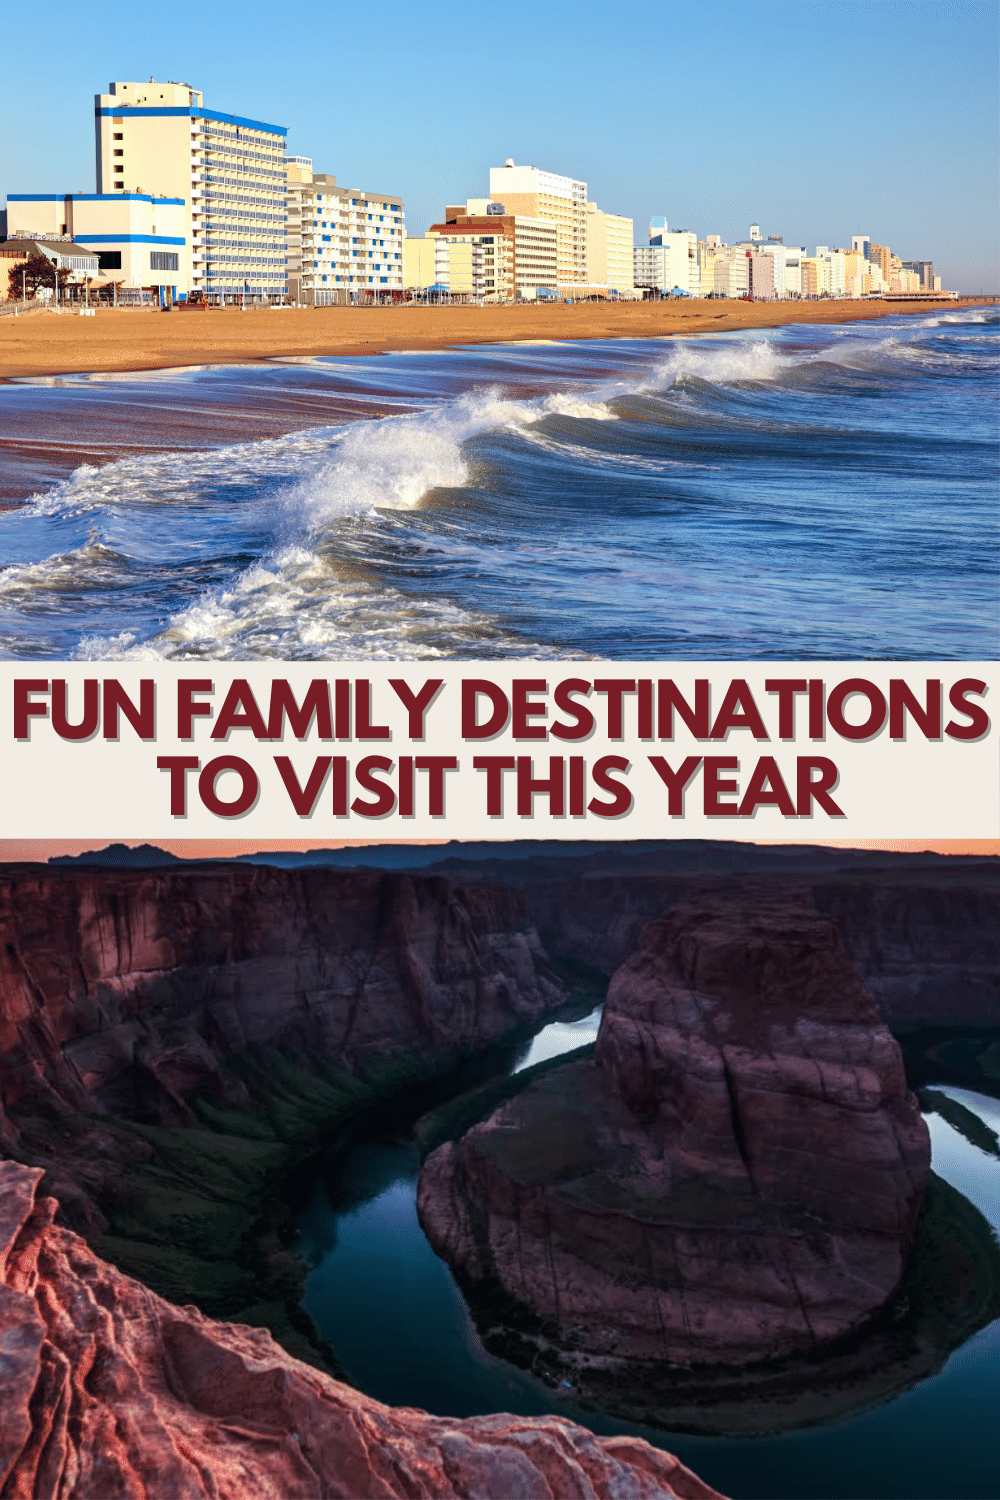 When it comes to taking off to fun family destinations, you are providing your family with opportunities to learn, bond and create long lasting memories. #familytravel #familydestinations via @wondermomwannab